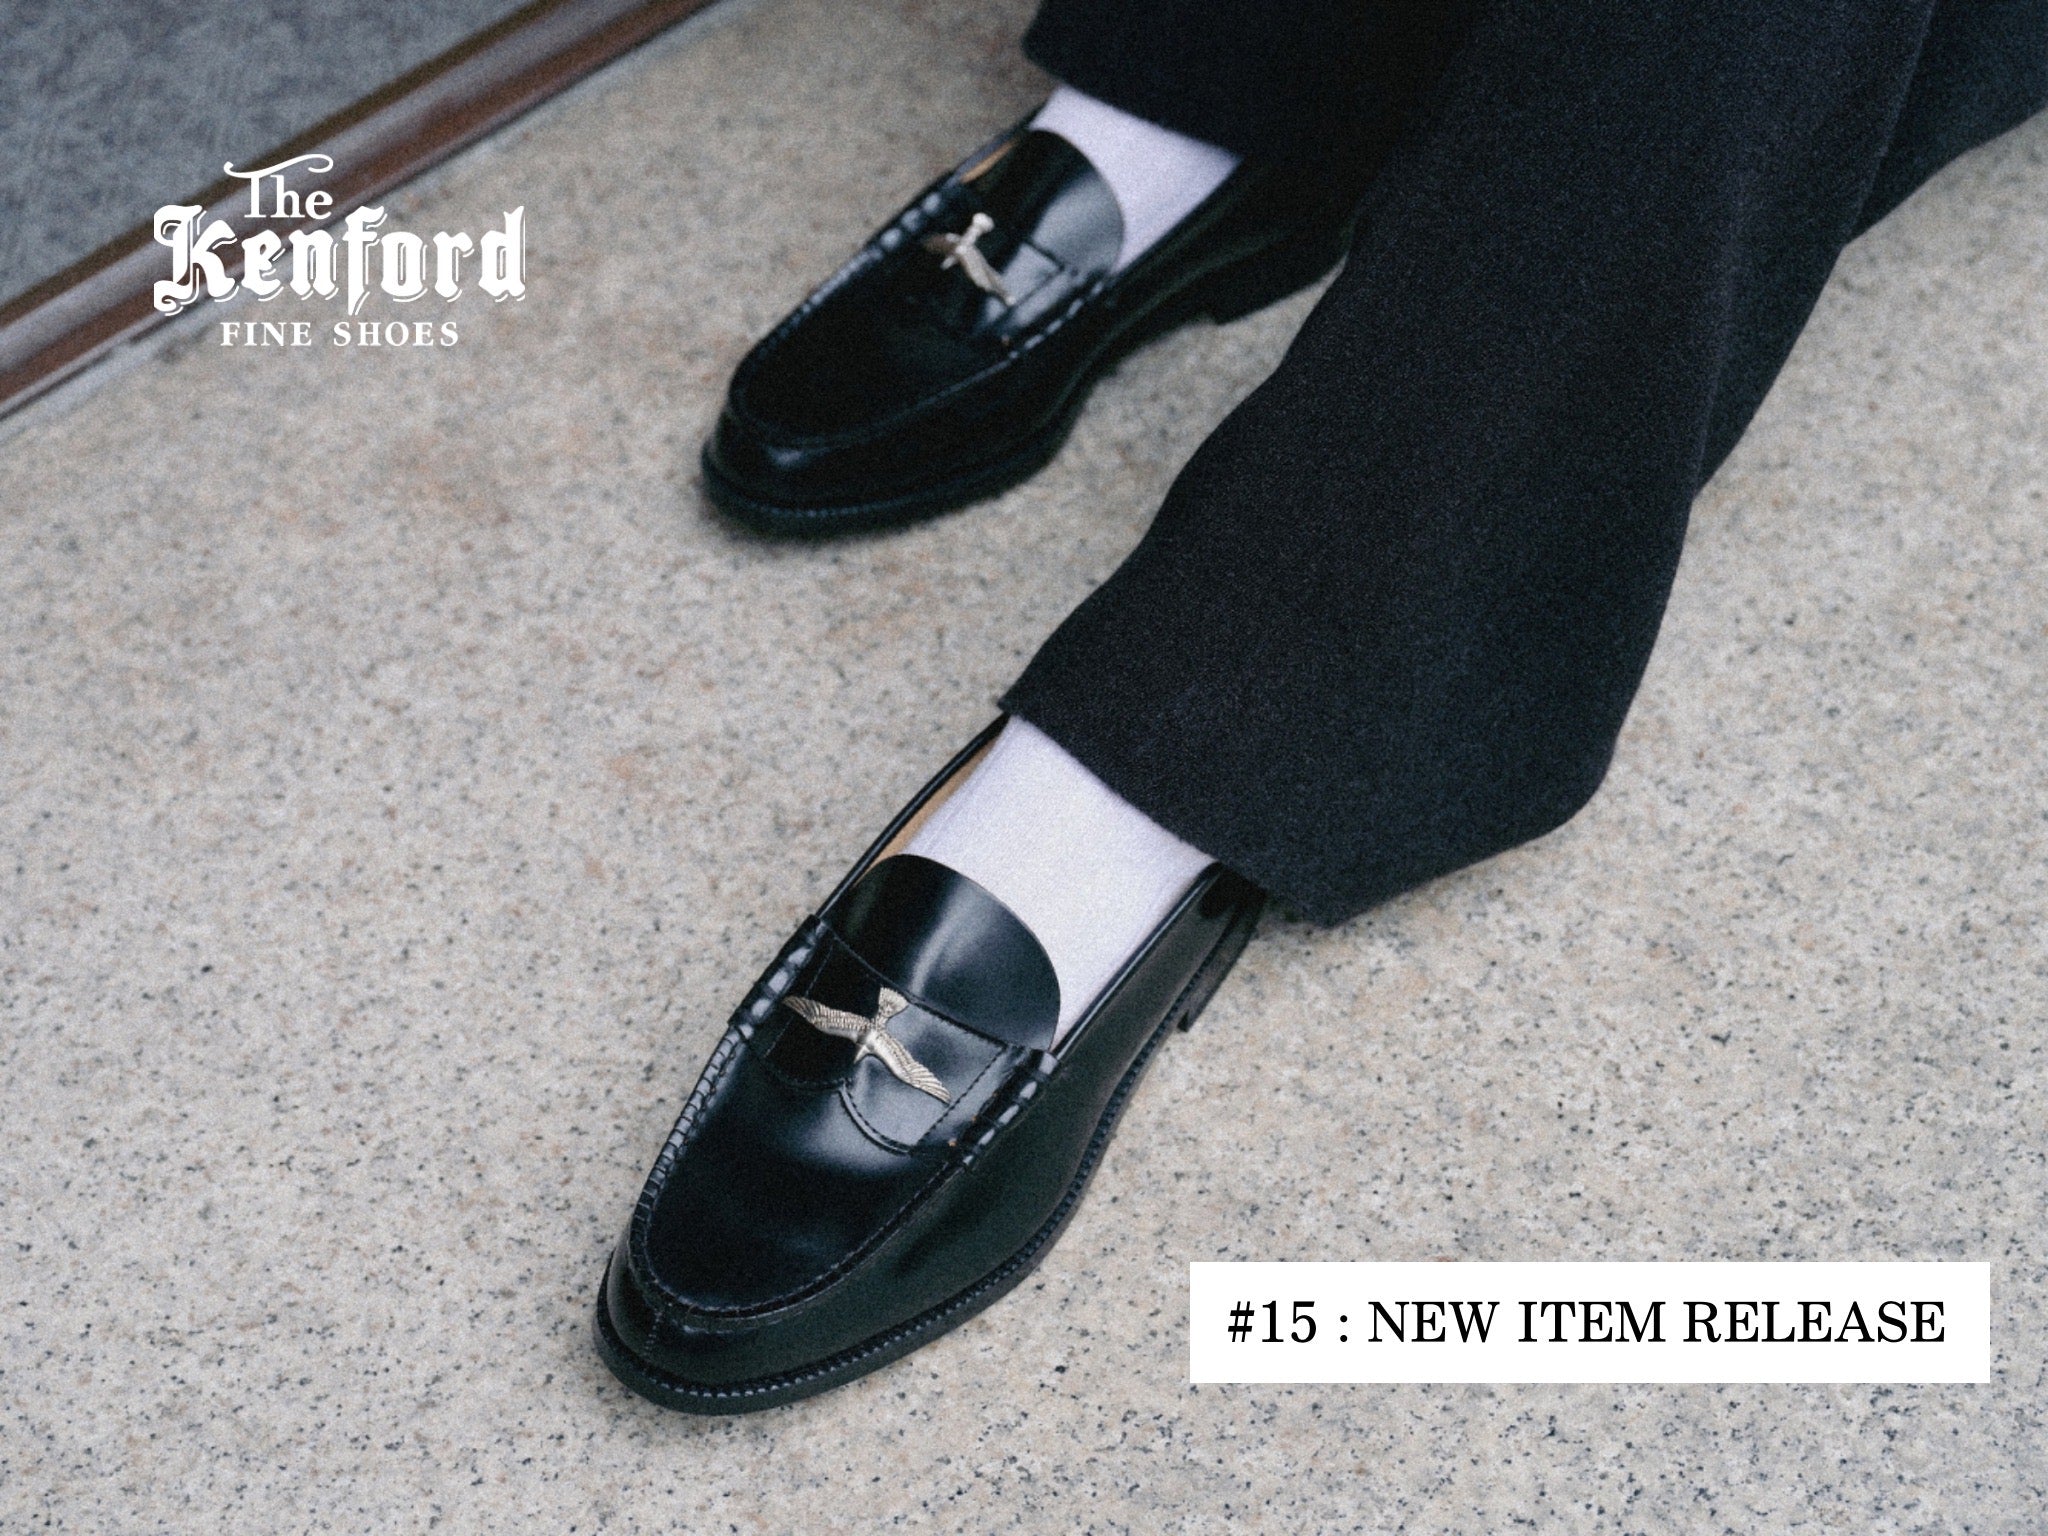 15 < The Kenford Fineshoes > NEW ITEM RELEASE – THE KENFORD